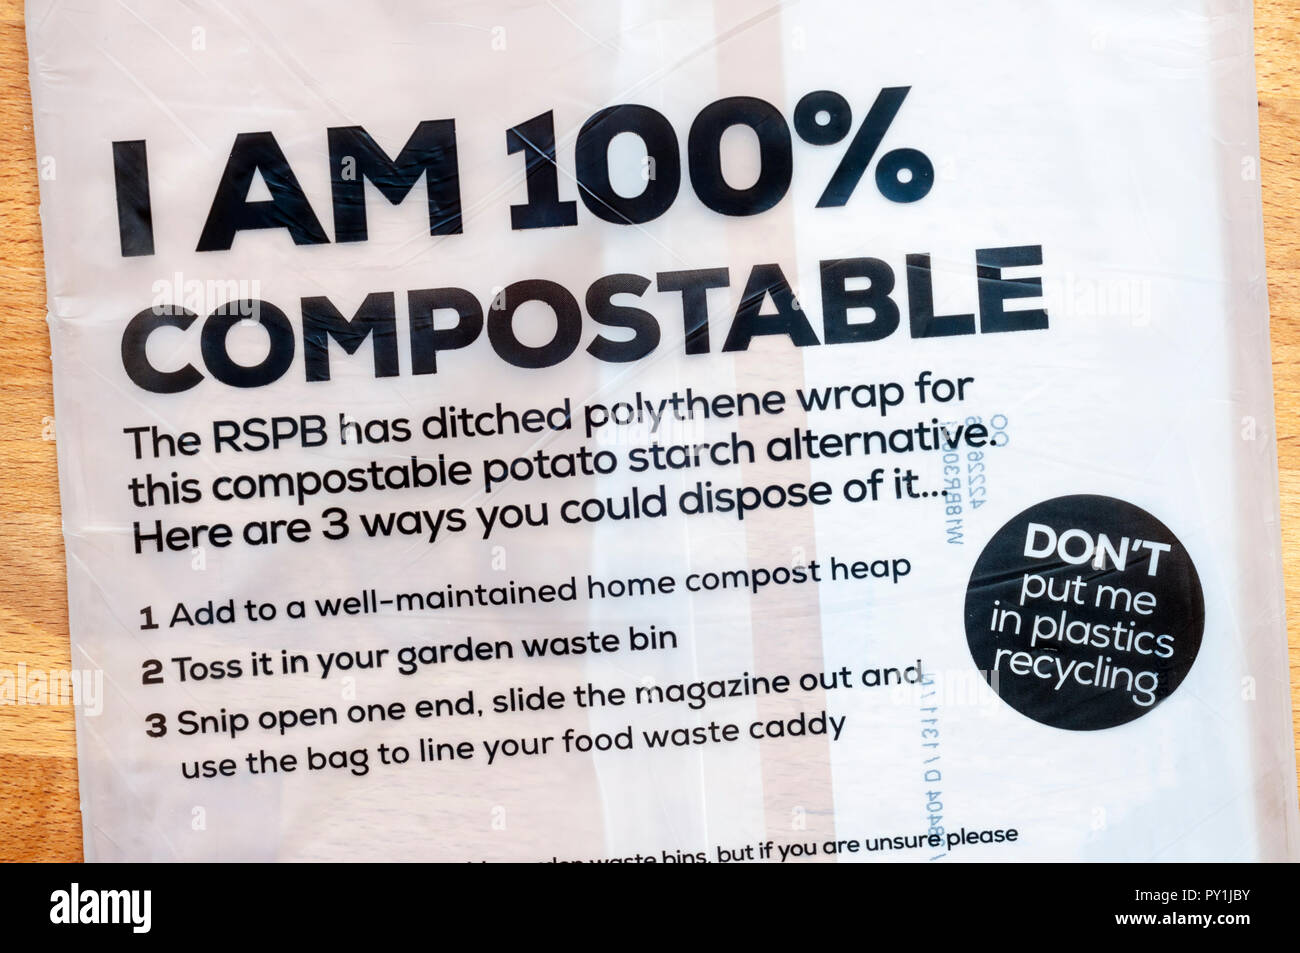 Biodegradable compostable bag for RSPB magazine.  Made from biodegradable potato starch. Stock Photo